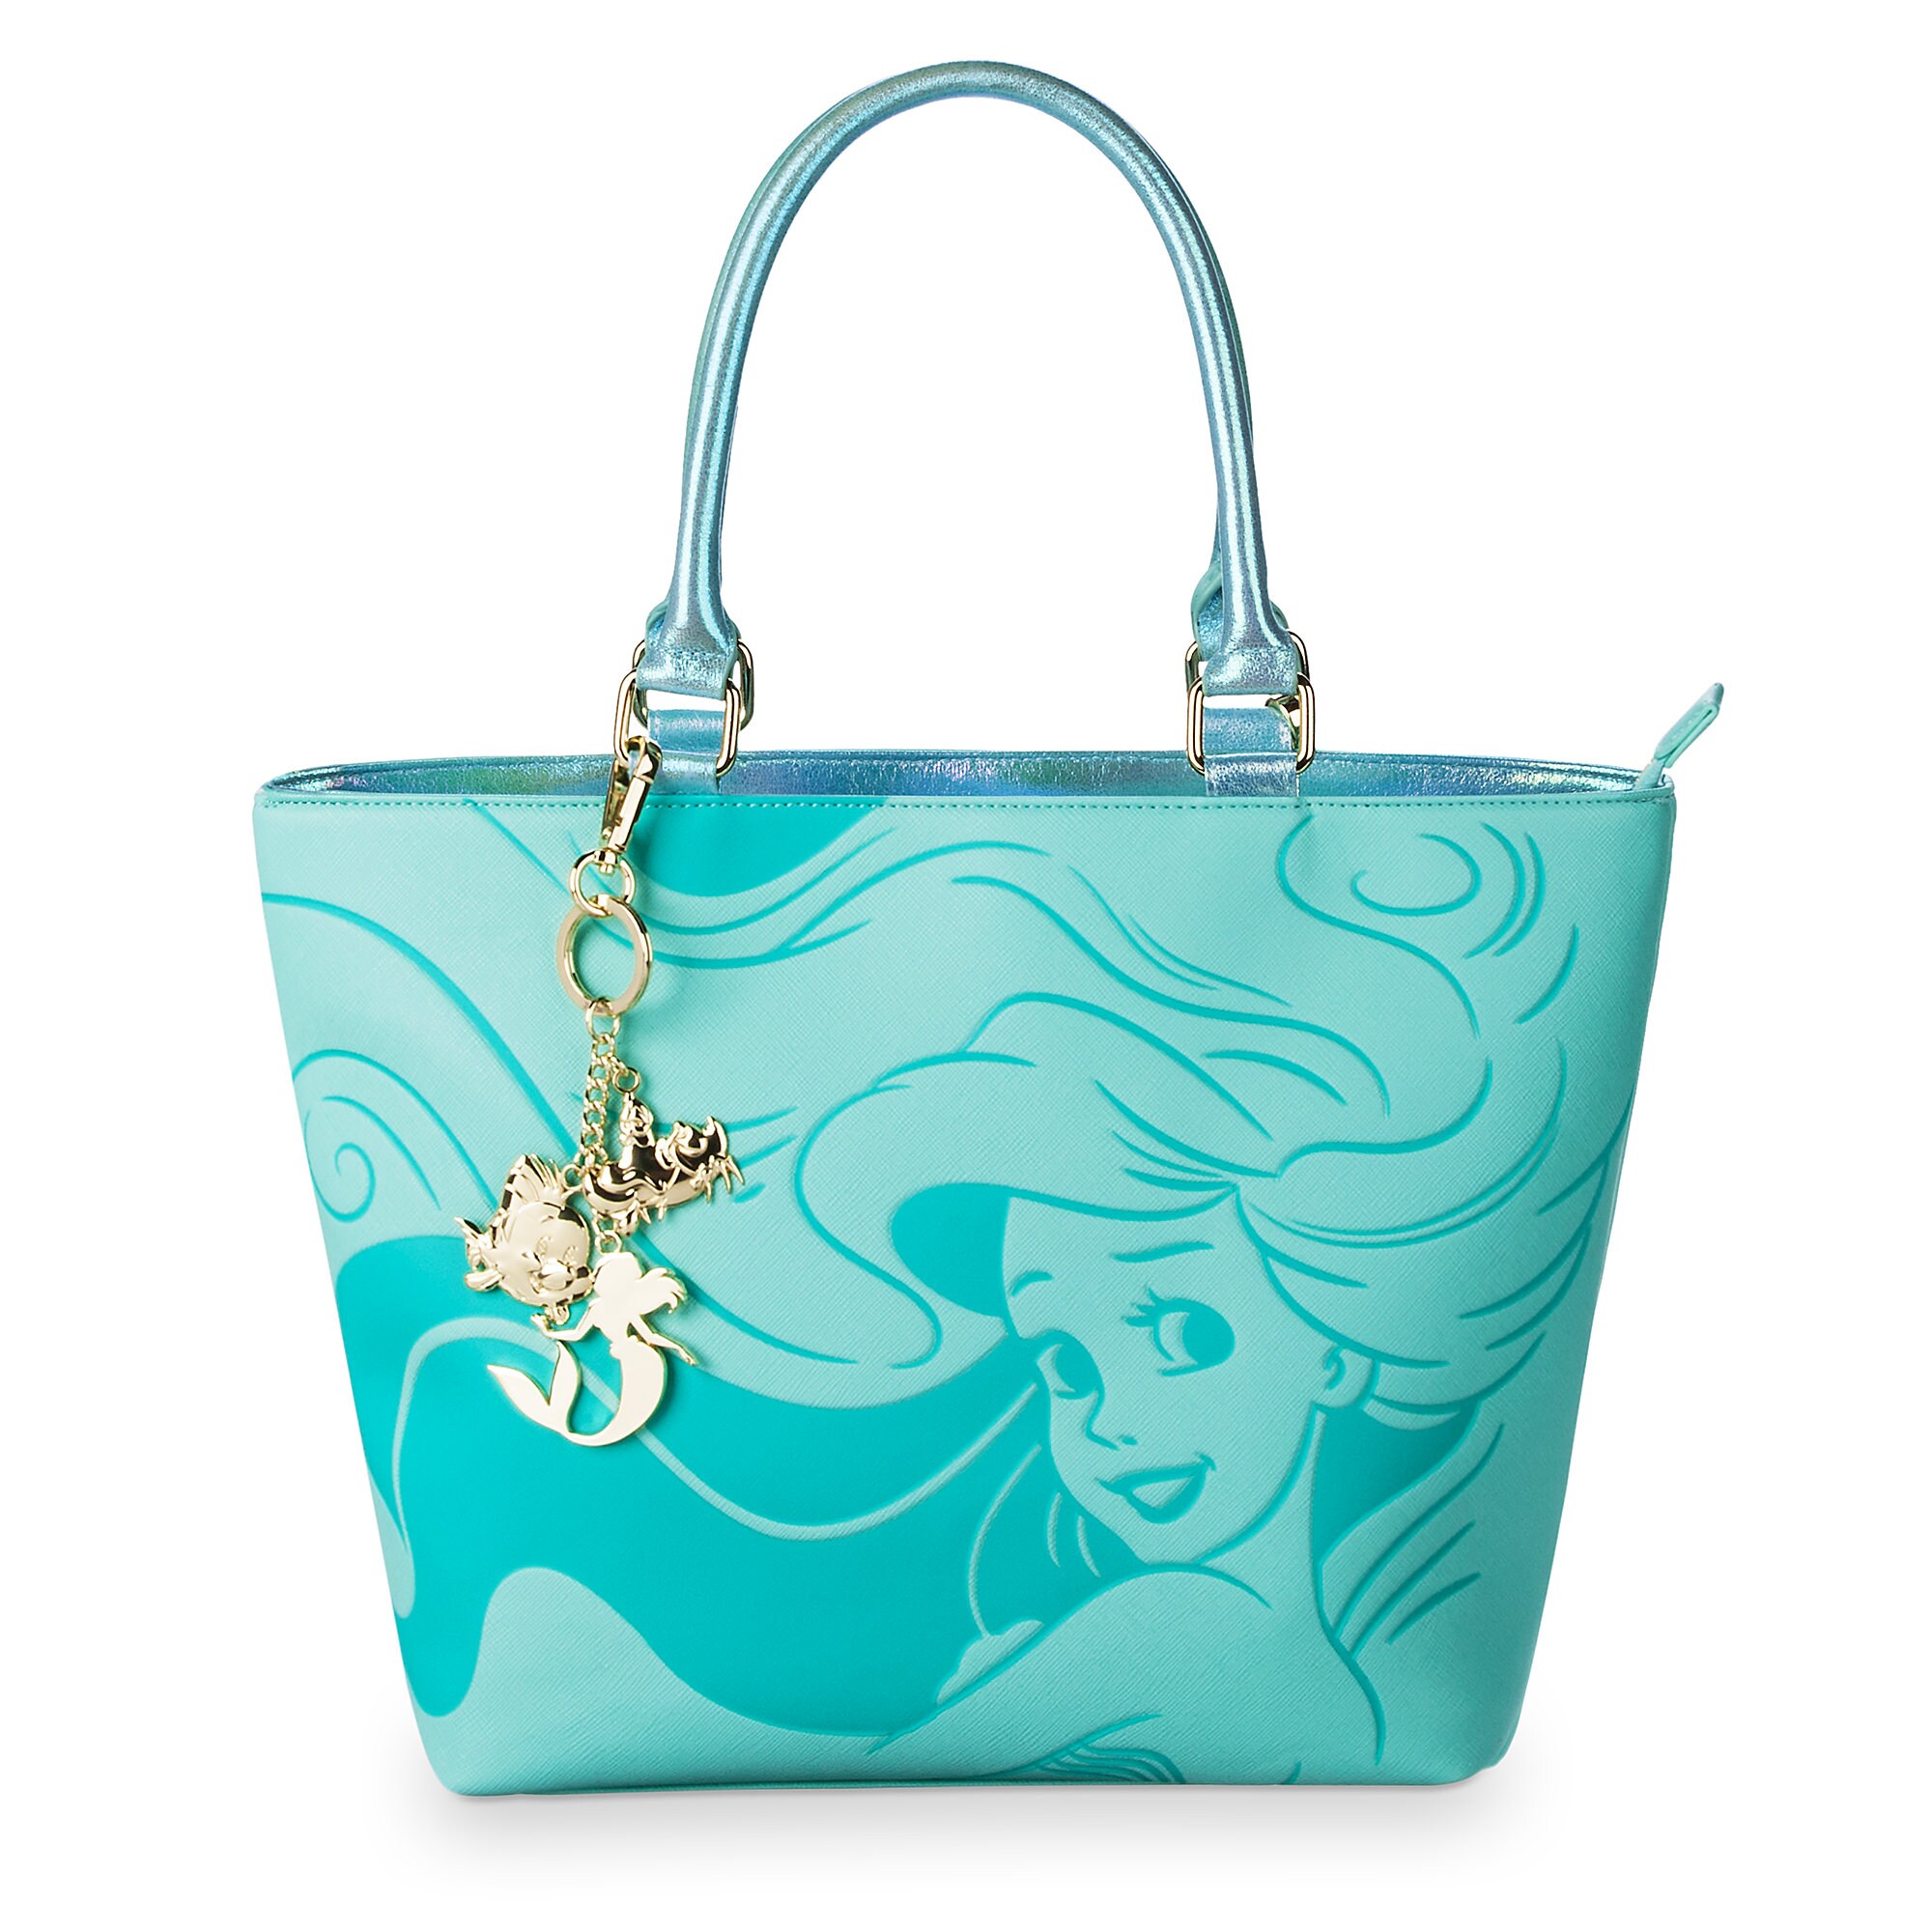 The Little Mermaid Tote by Loungefly